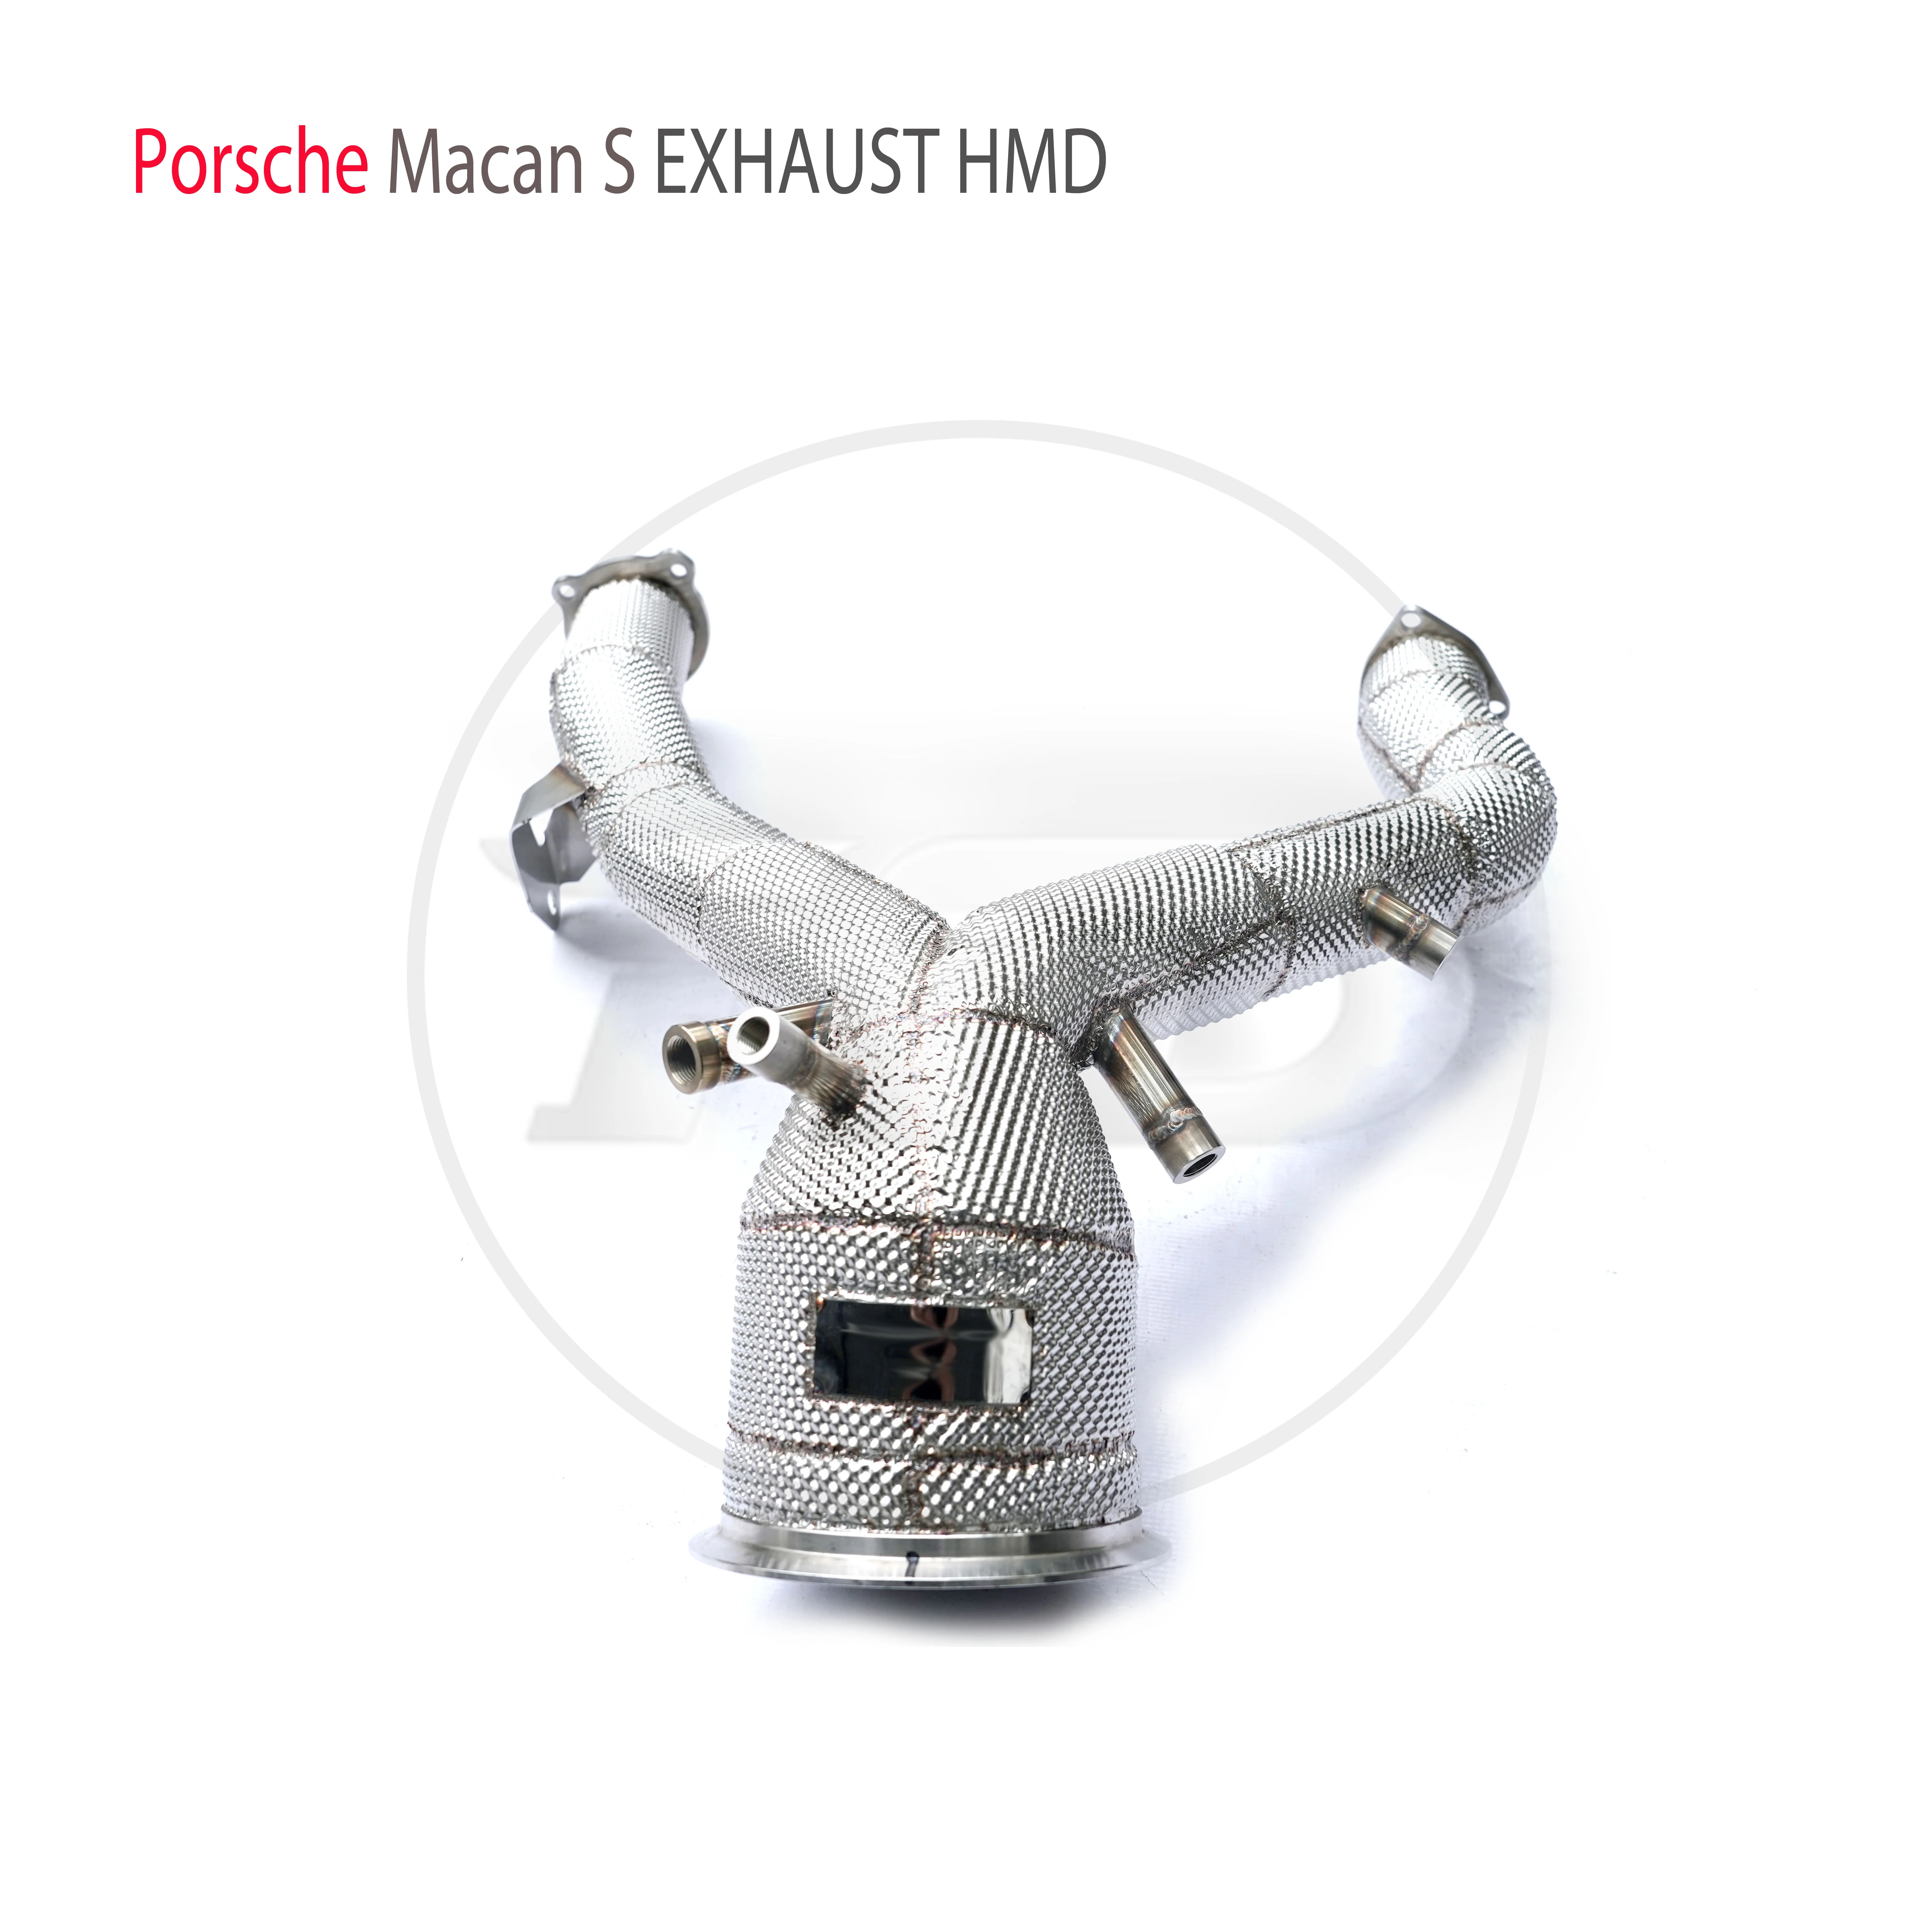 

HMD Car Accessories Exhaust System High Flow Performance Downpipe for Porsche Macan S With Catalytic Coverter Headers